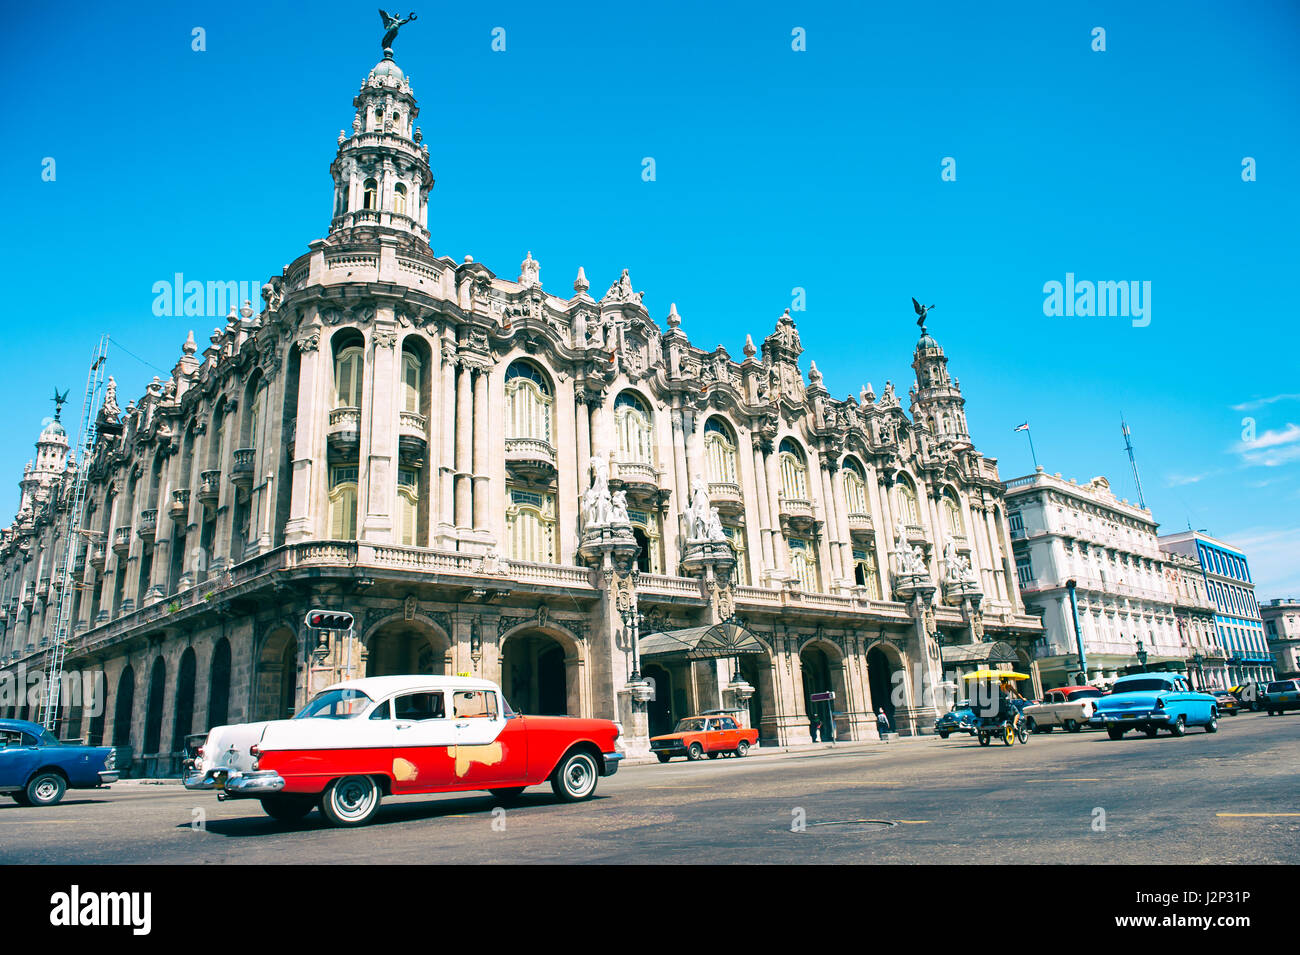 HAVANA - JUNE 14, 2011: Classic American cars serving as taxis drive in front of a bright view of the landmark Great Theatre of Havana. Stock Photo